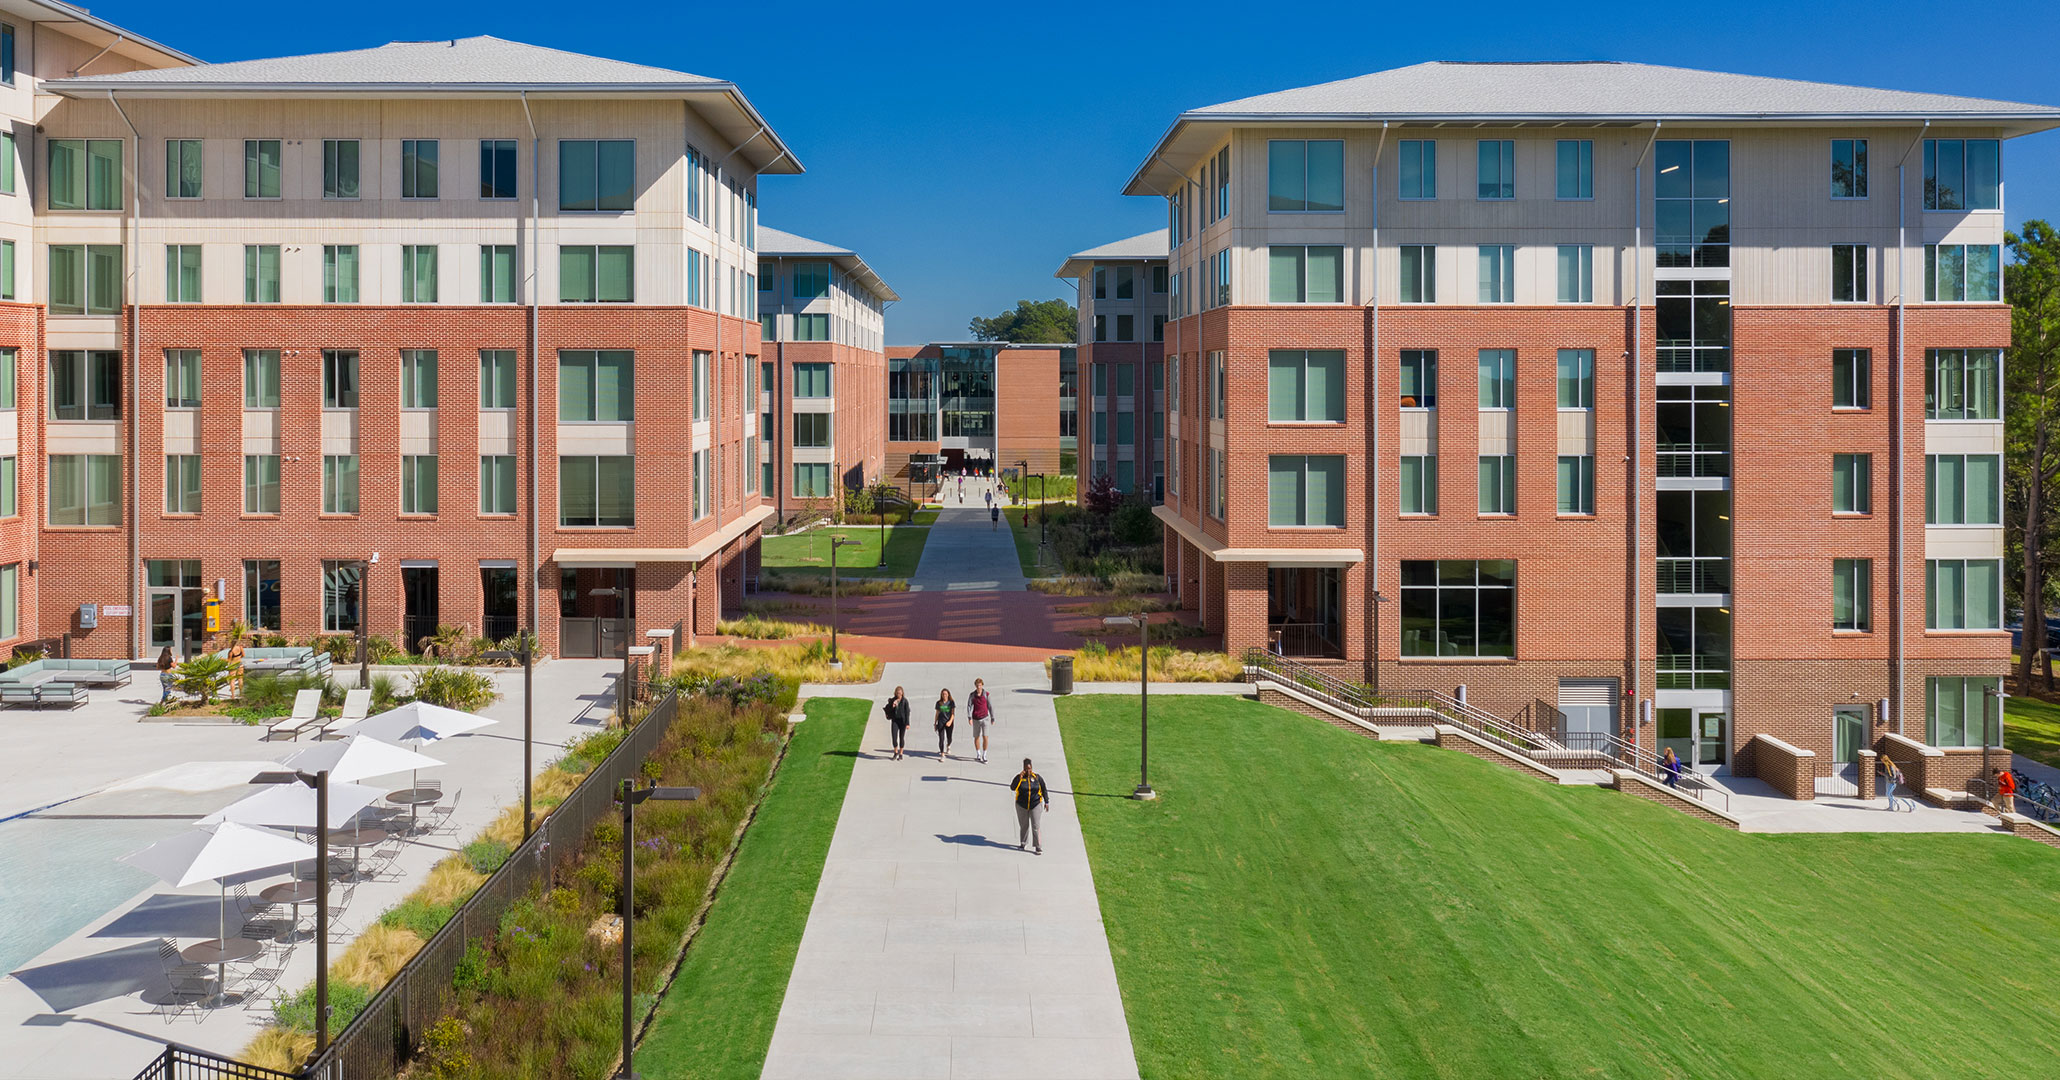 Clemson University worked with Boudreaux architects to design modern technology focused student housing.